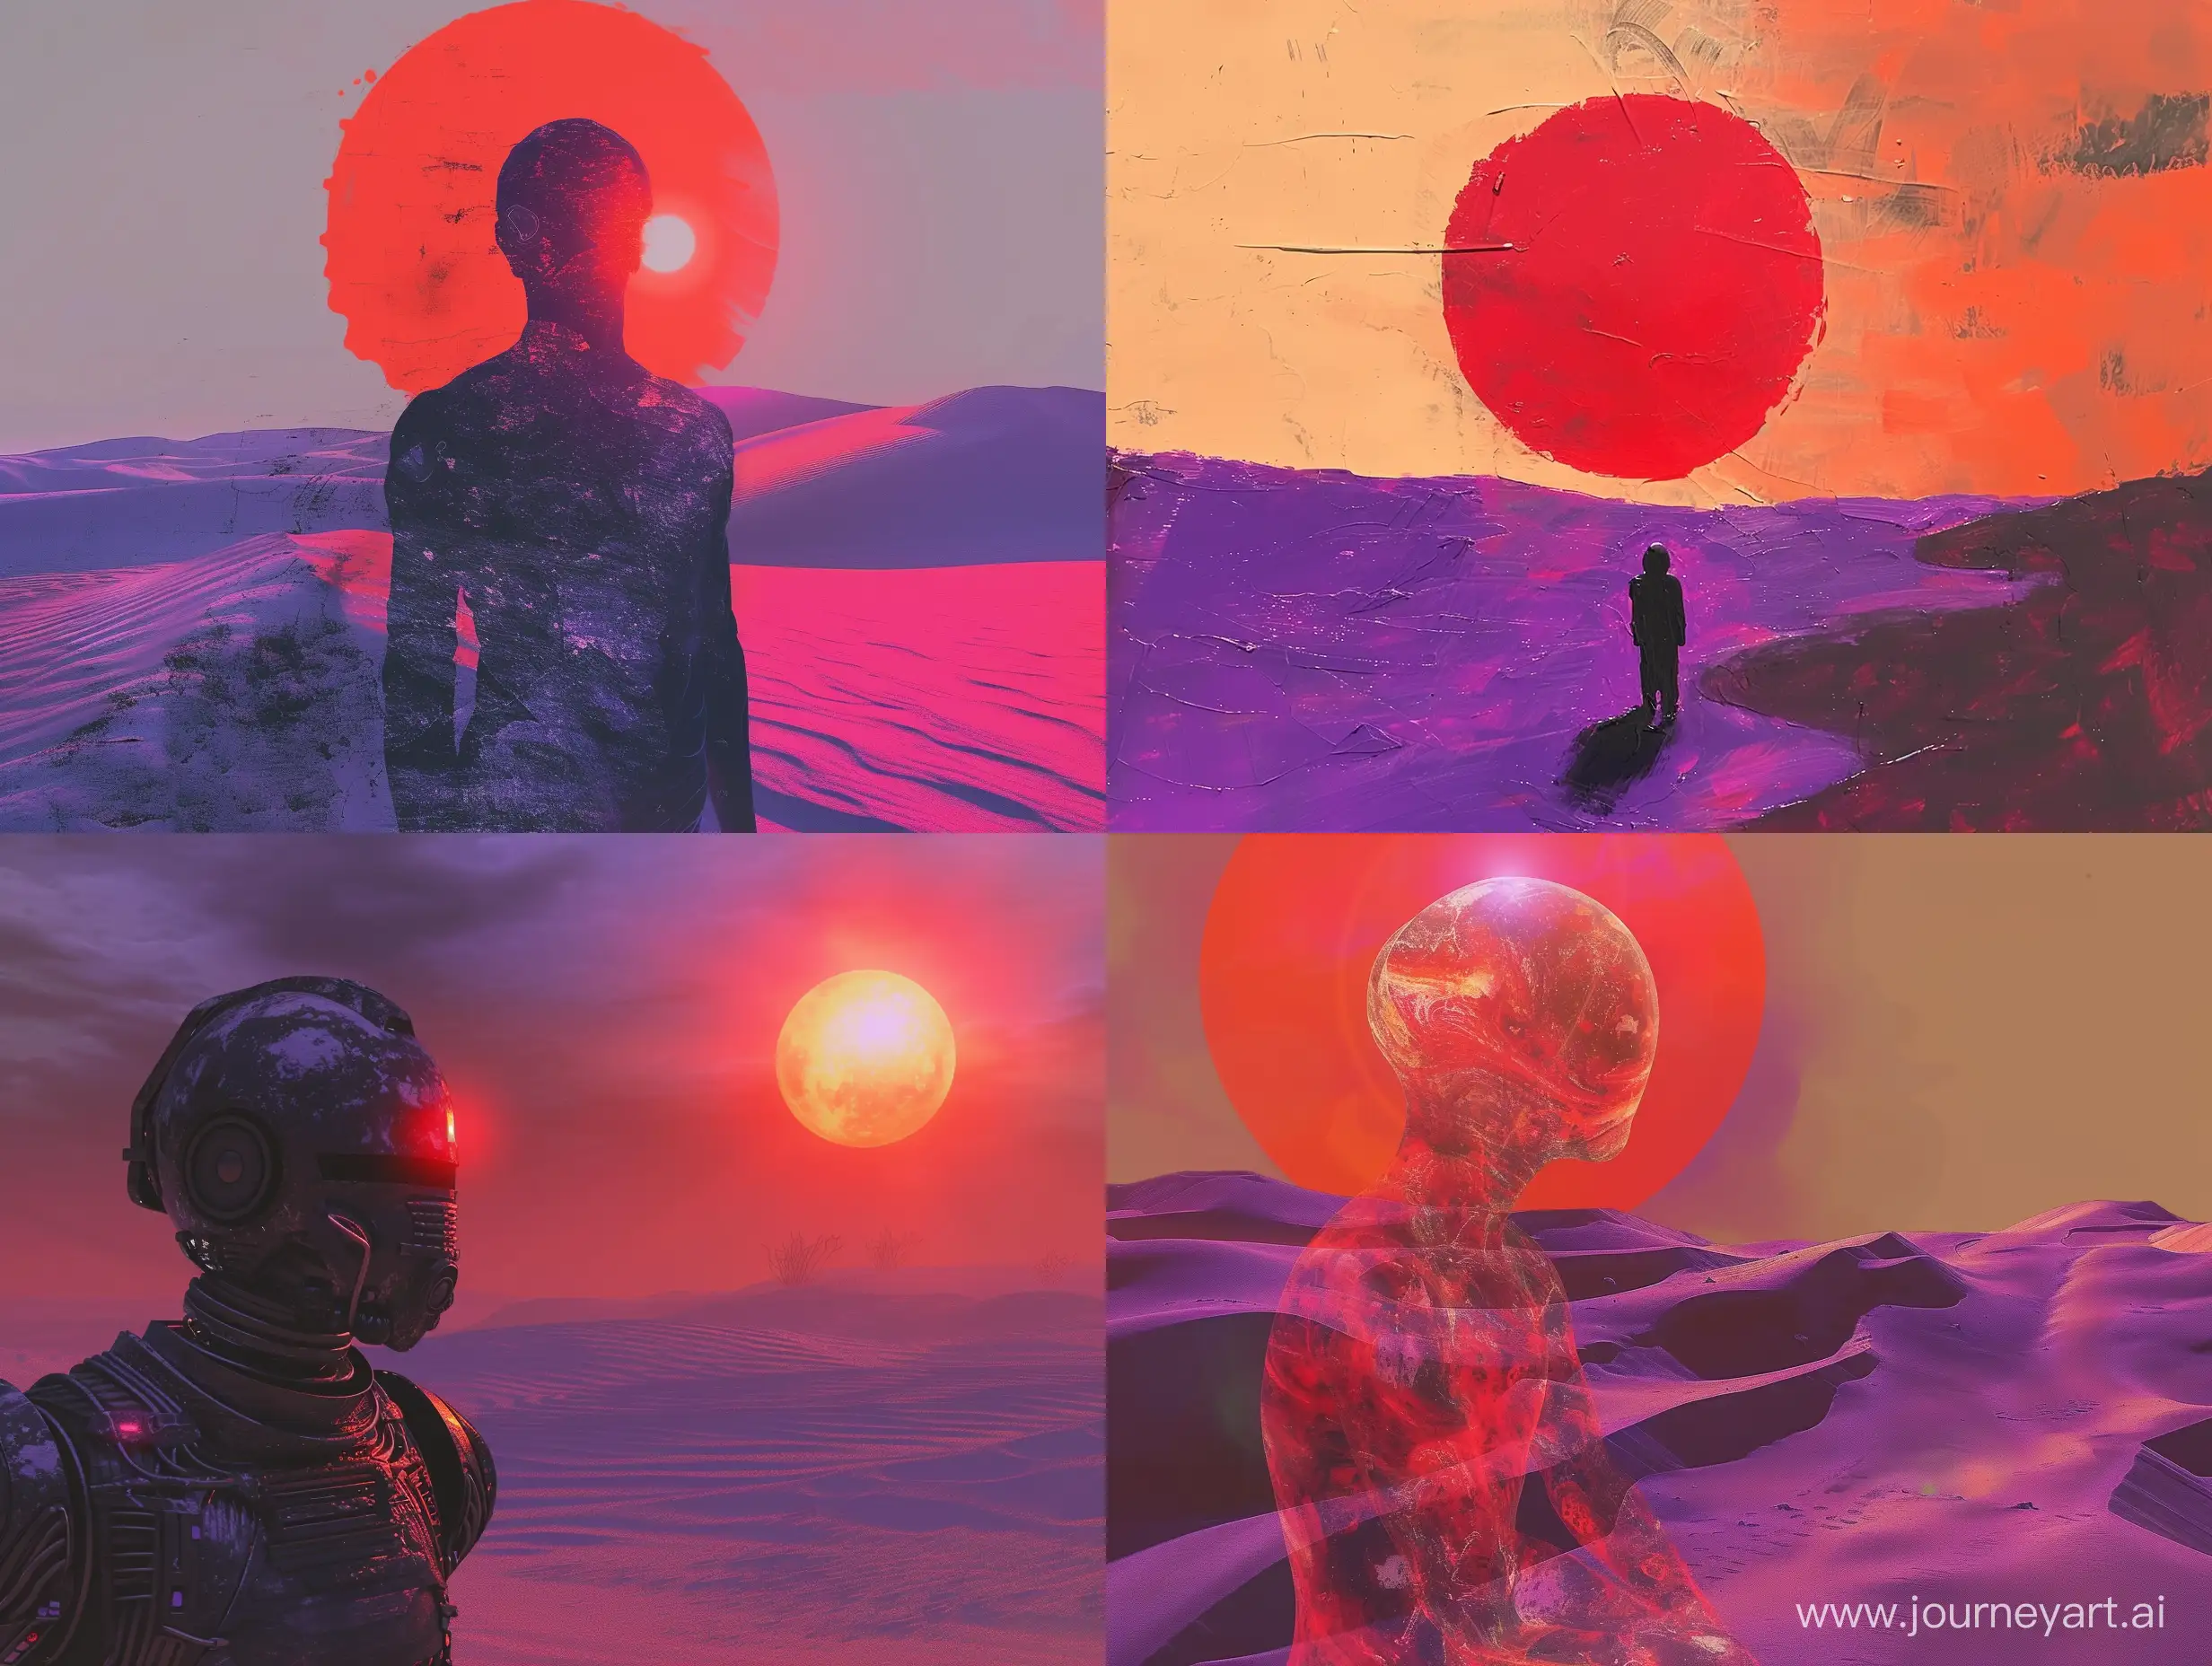 Lonely-Humanoid-in-Red-Desert-with-Purple-Sand